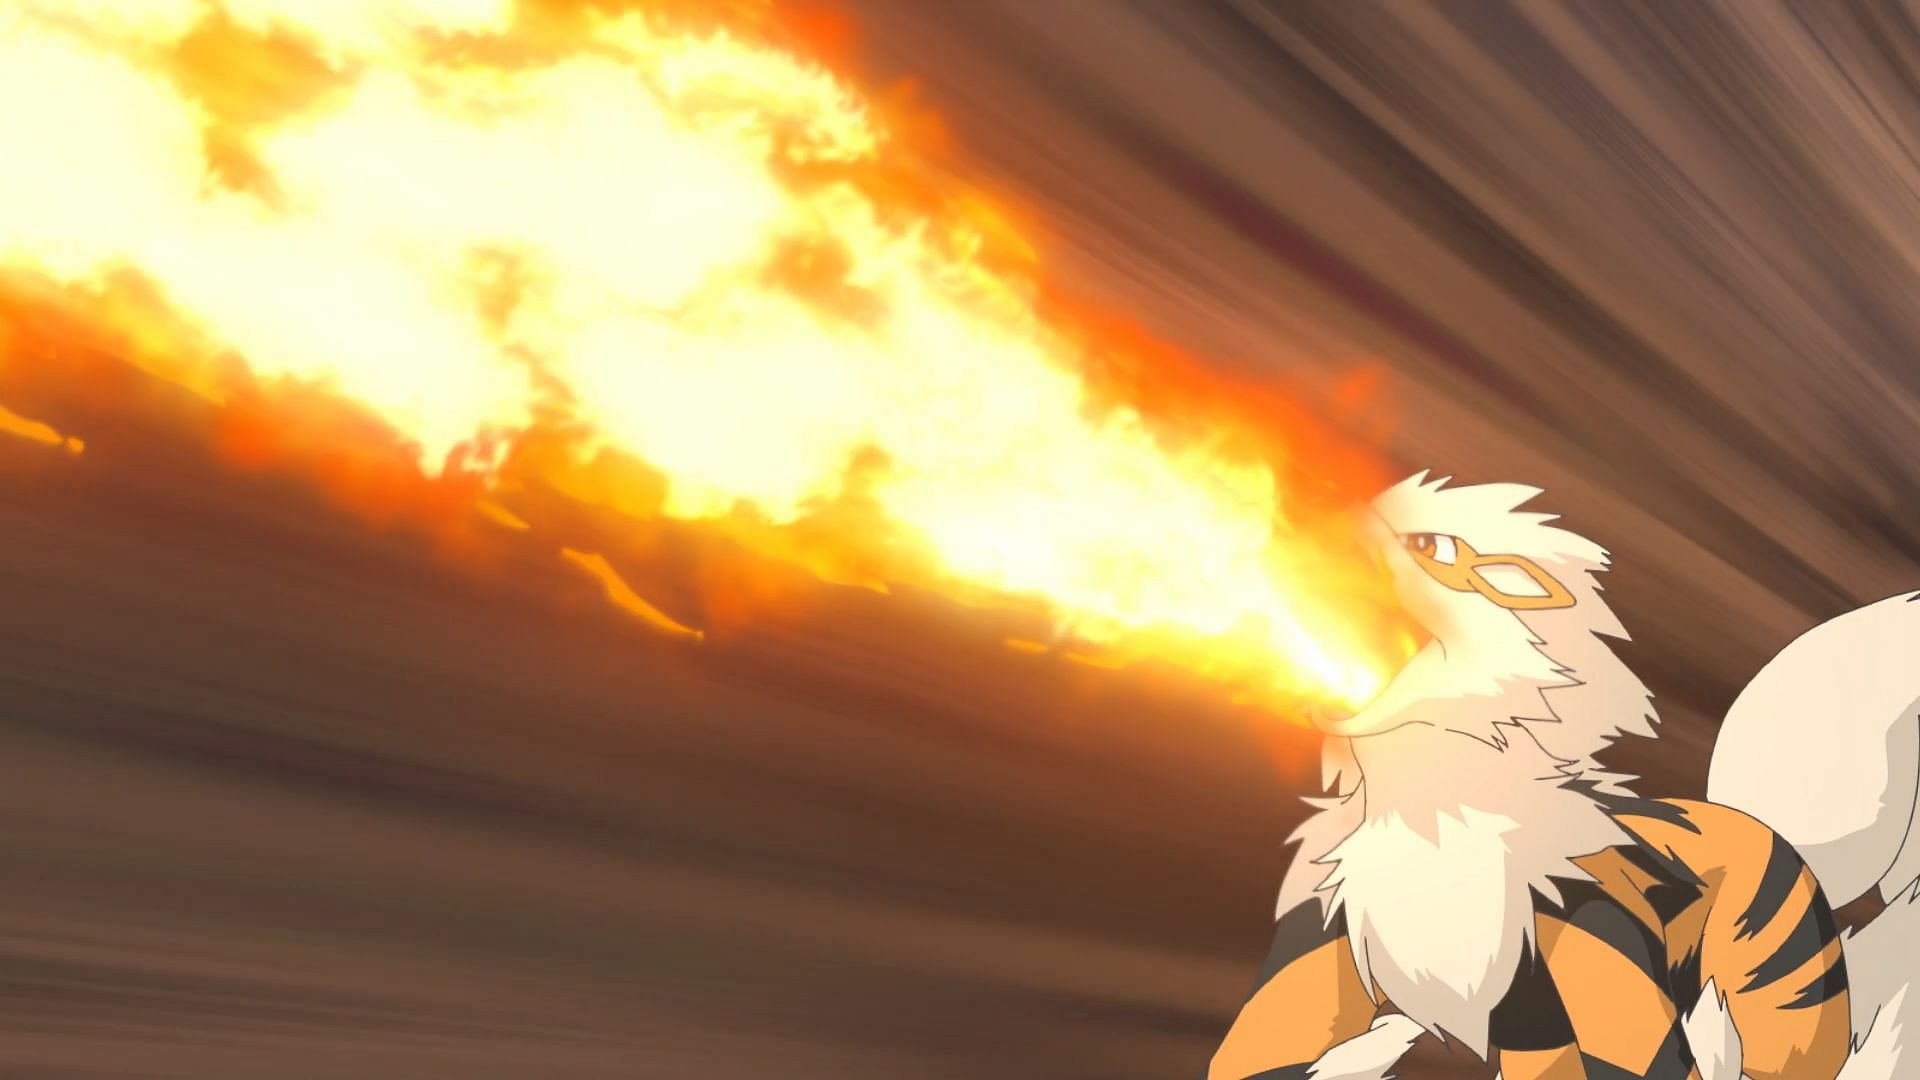 Arcanine was the Pokedle Classic answer for April 7 (Image via The Pokemon Company)